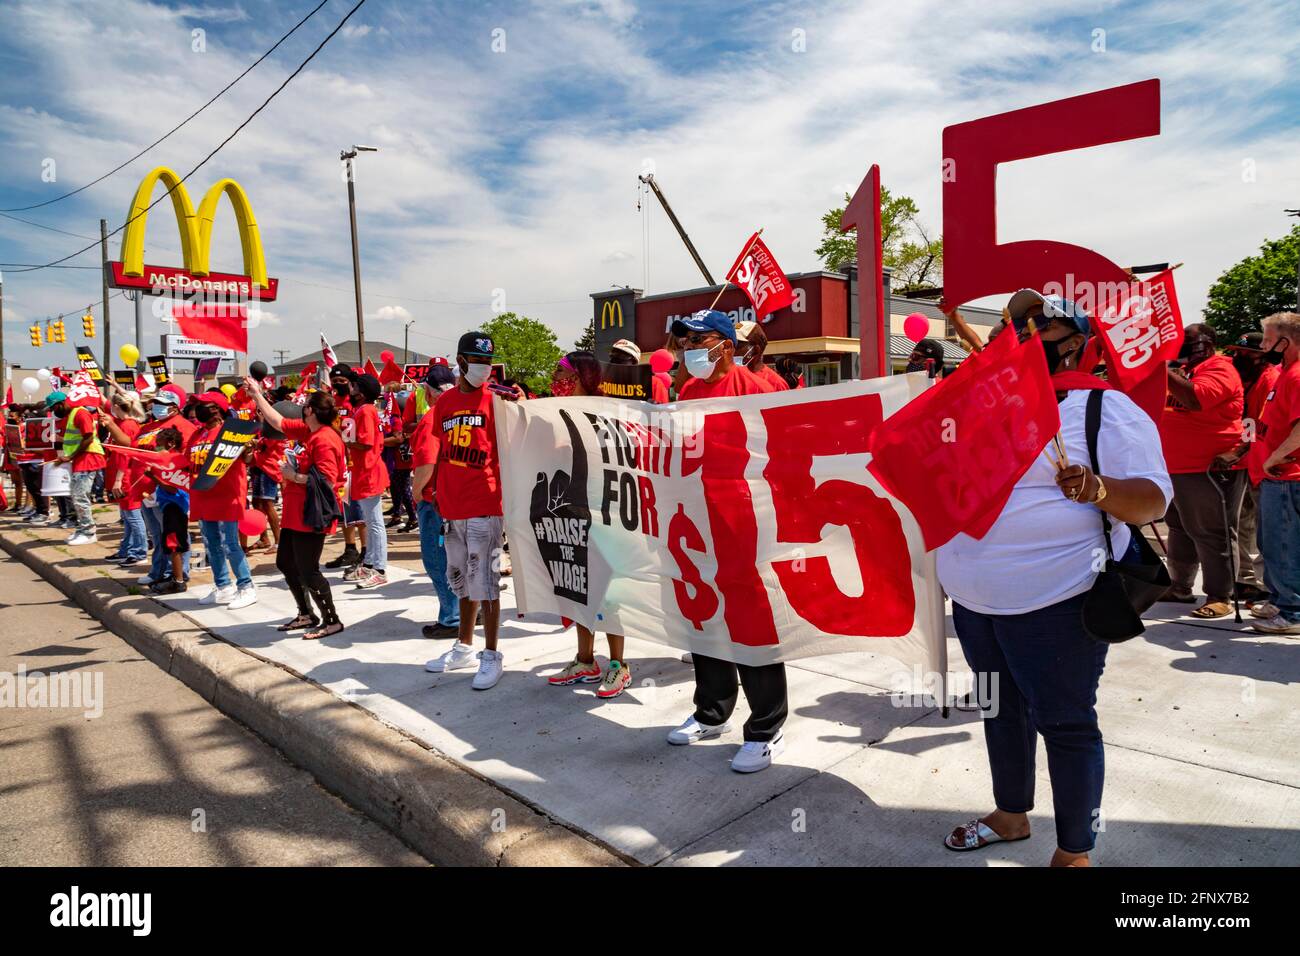 Detroit, Michigan, USA. 19th May, 2021. Fast food workers rally at a McDonald's restaurant for a $15 minimum wage. It was part of a one-day strike against McDonald's in 15 cities. Credit: Jim West/Alamy Live News Stock Photo